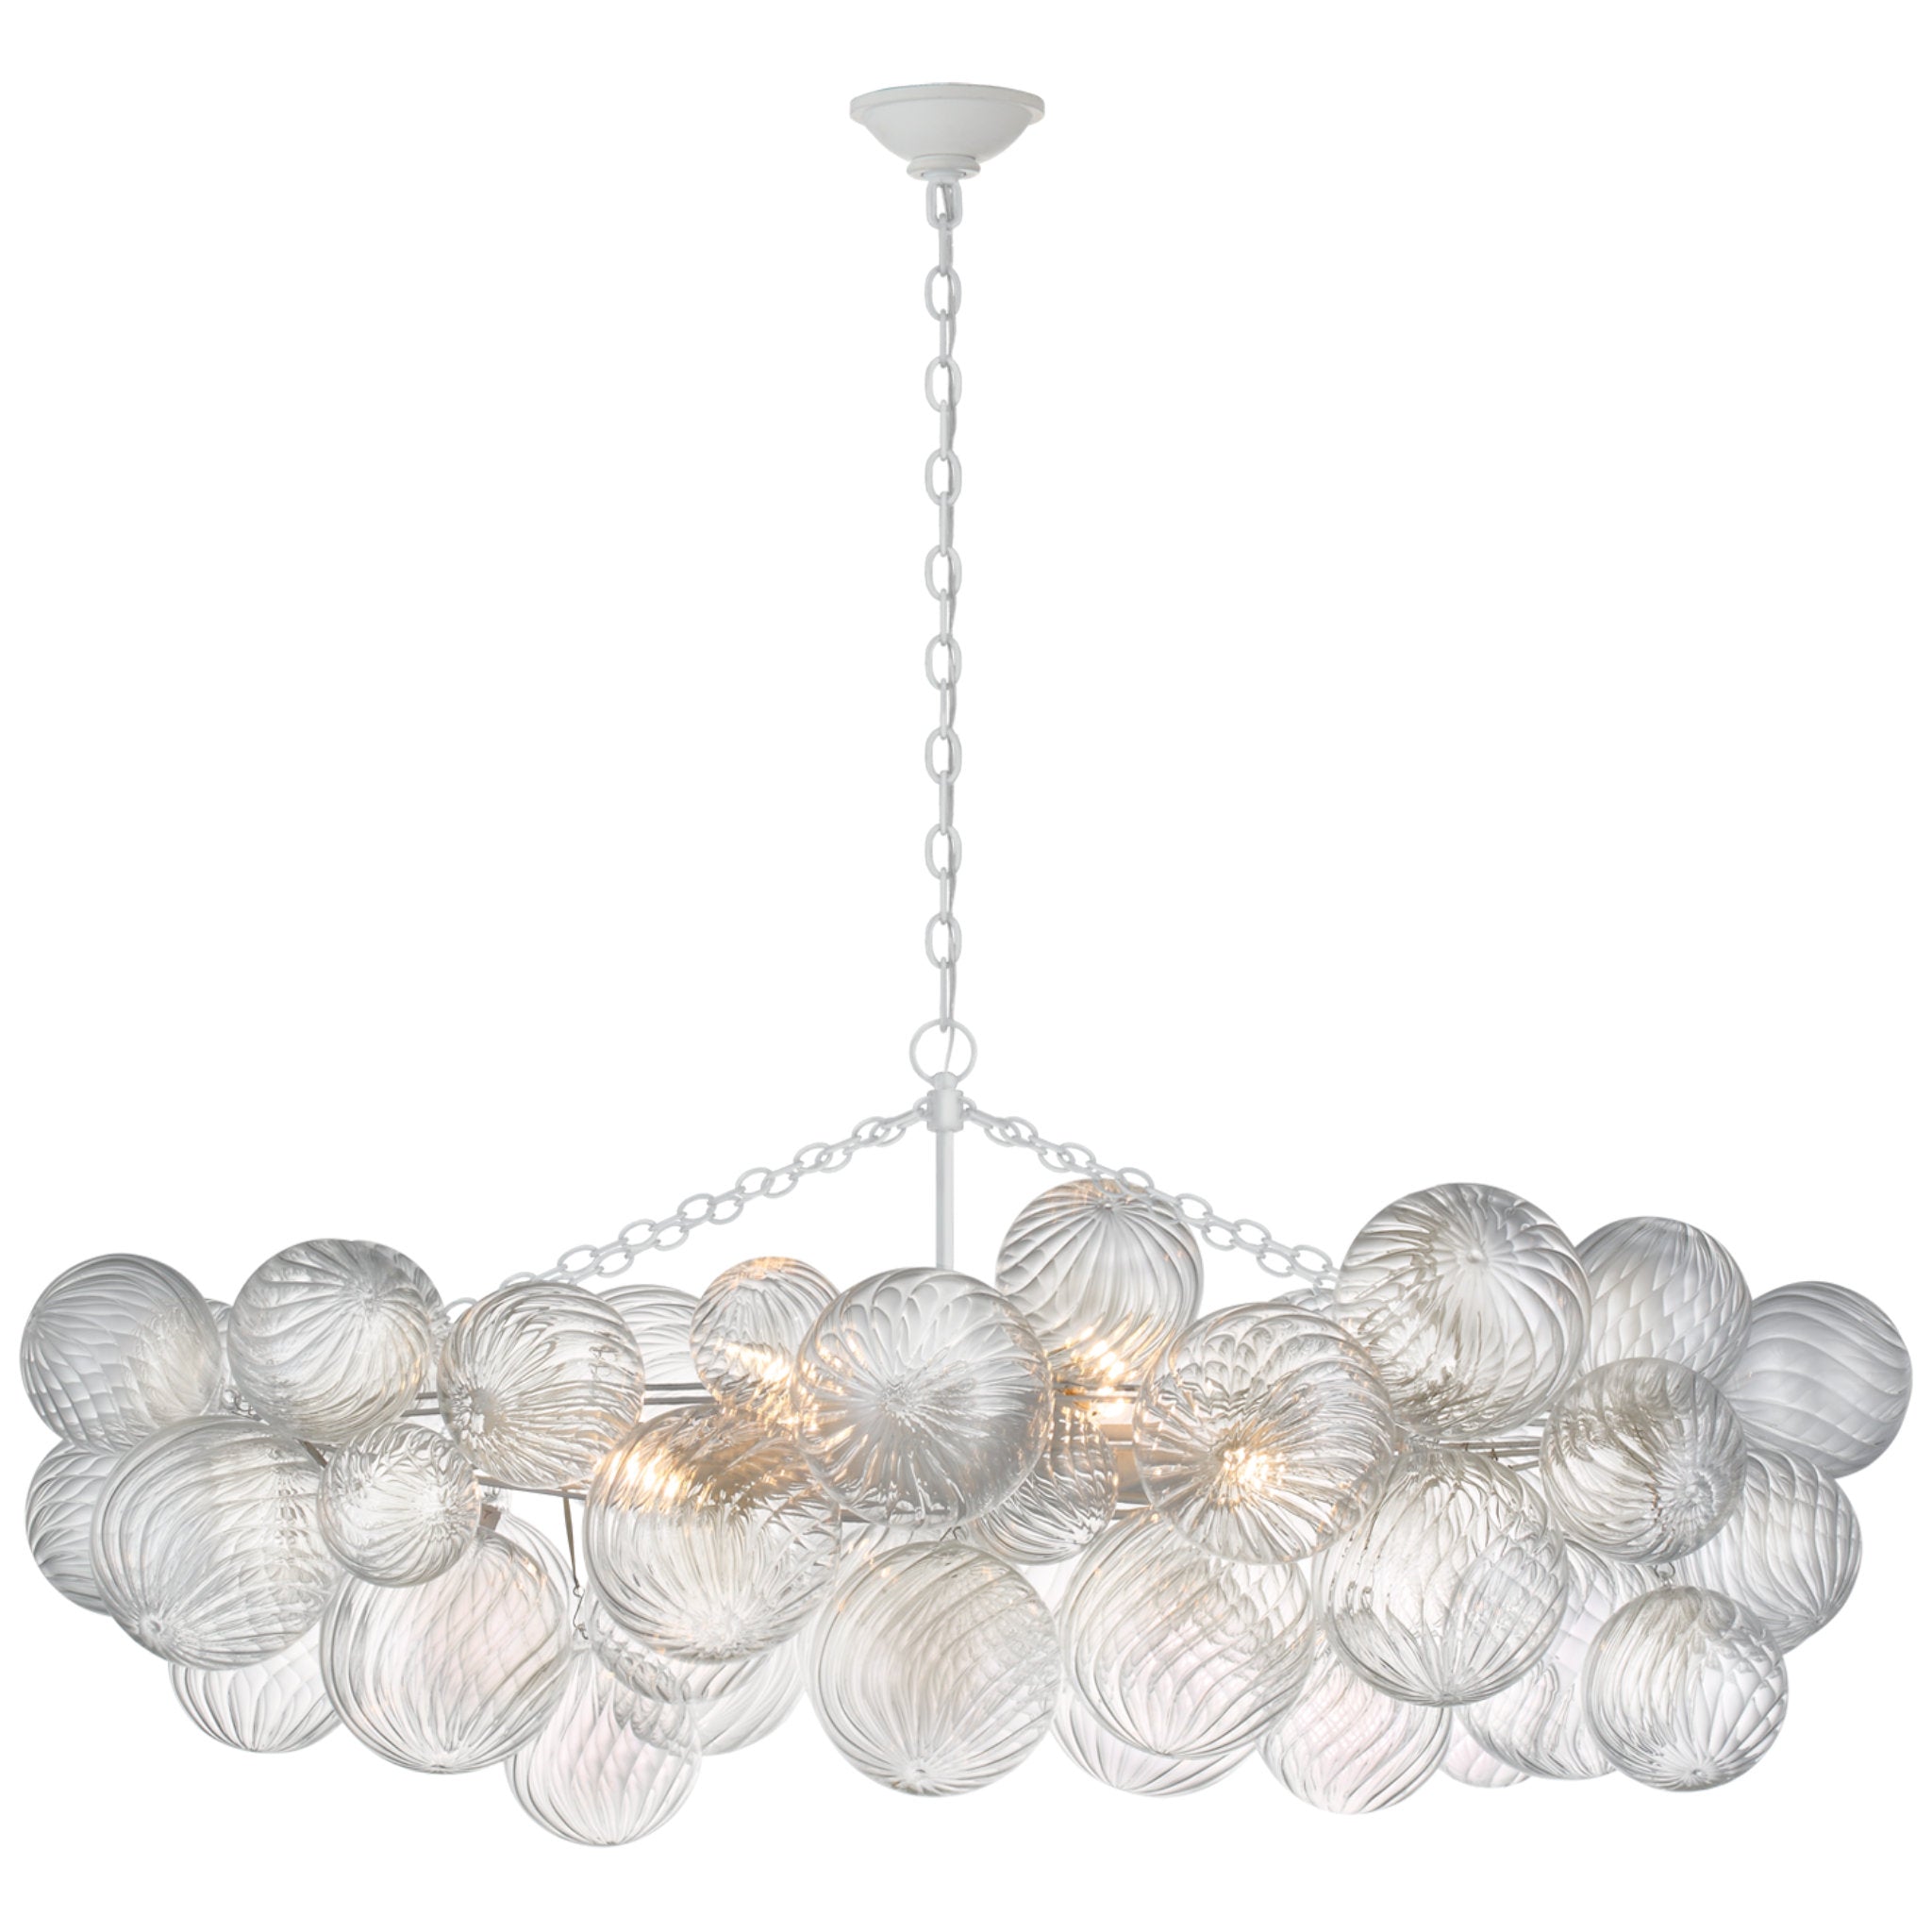 Julie Neill Talia Medium Linear Chandelier in Plaster White with Clear Swirled Glass